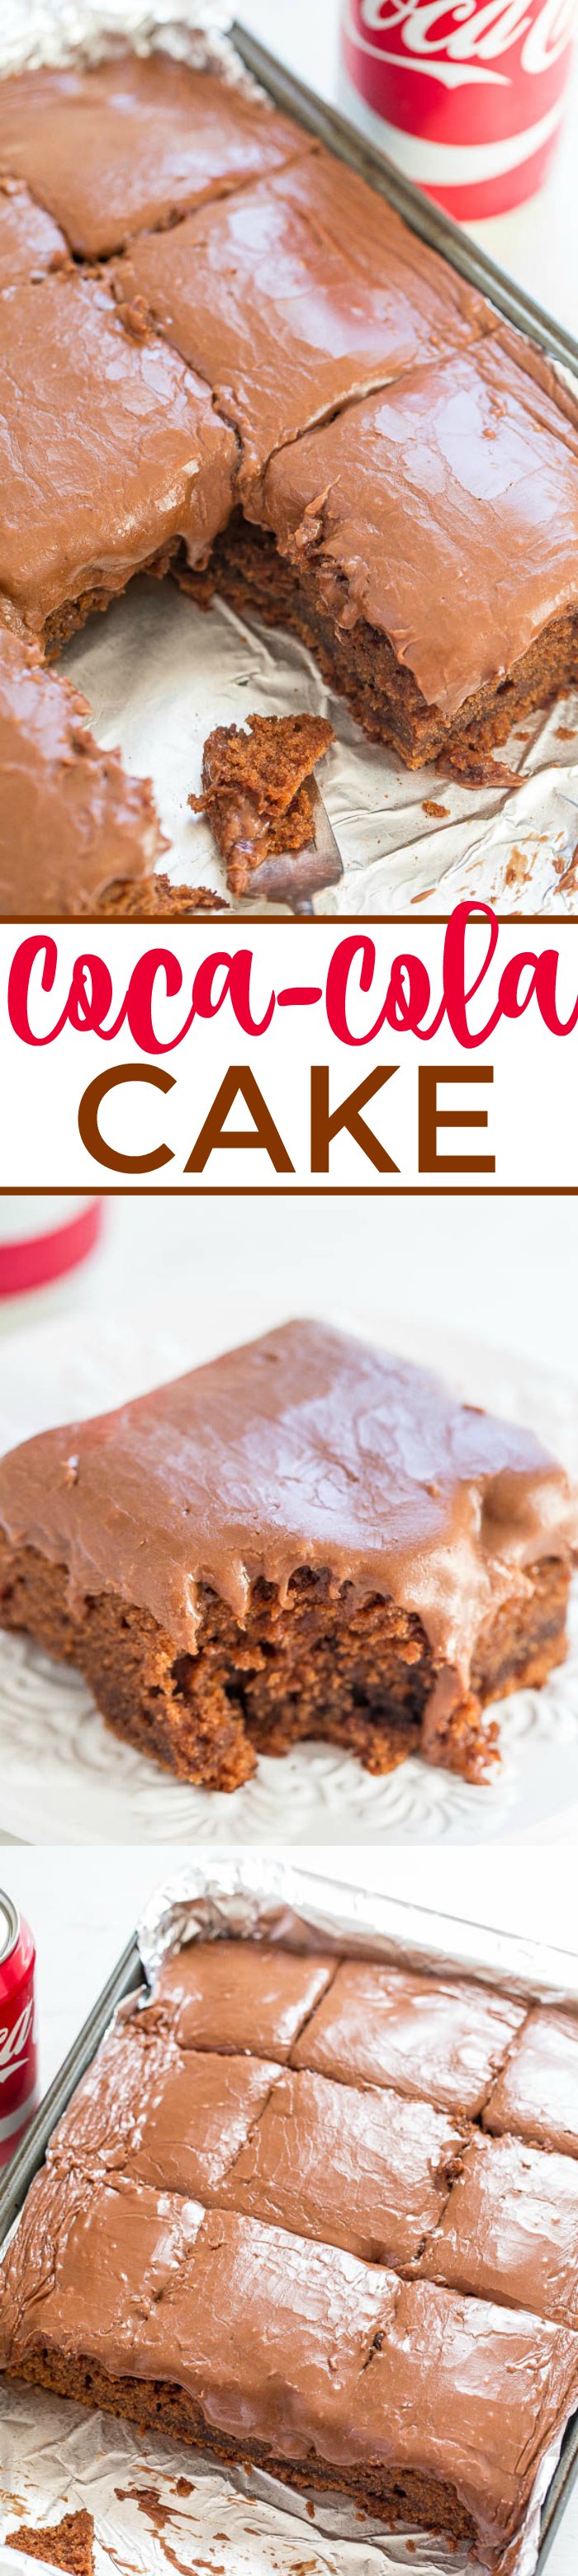 Coca-Cola Cake — One can of Coke in the cake and another can of Coke in the frosting!! EASY no-mixer cake that's supremely moist! Tastes like a Texas sheet cake spiked with Coke!!